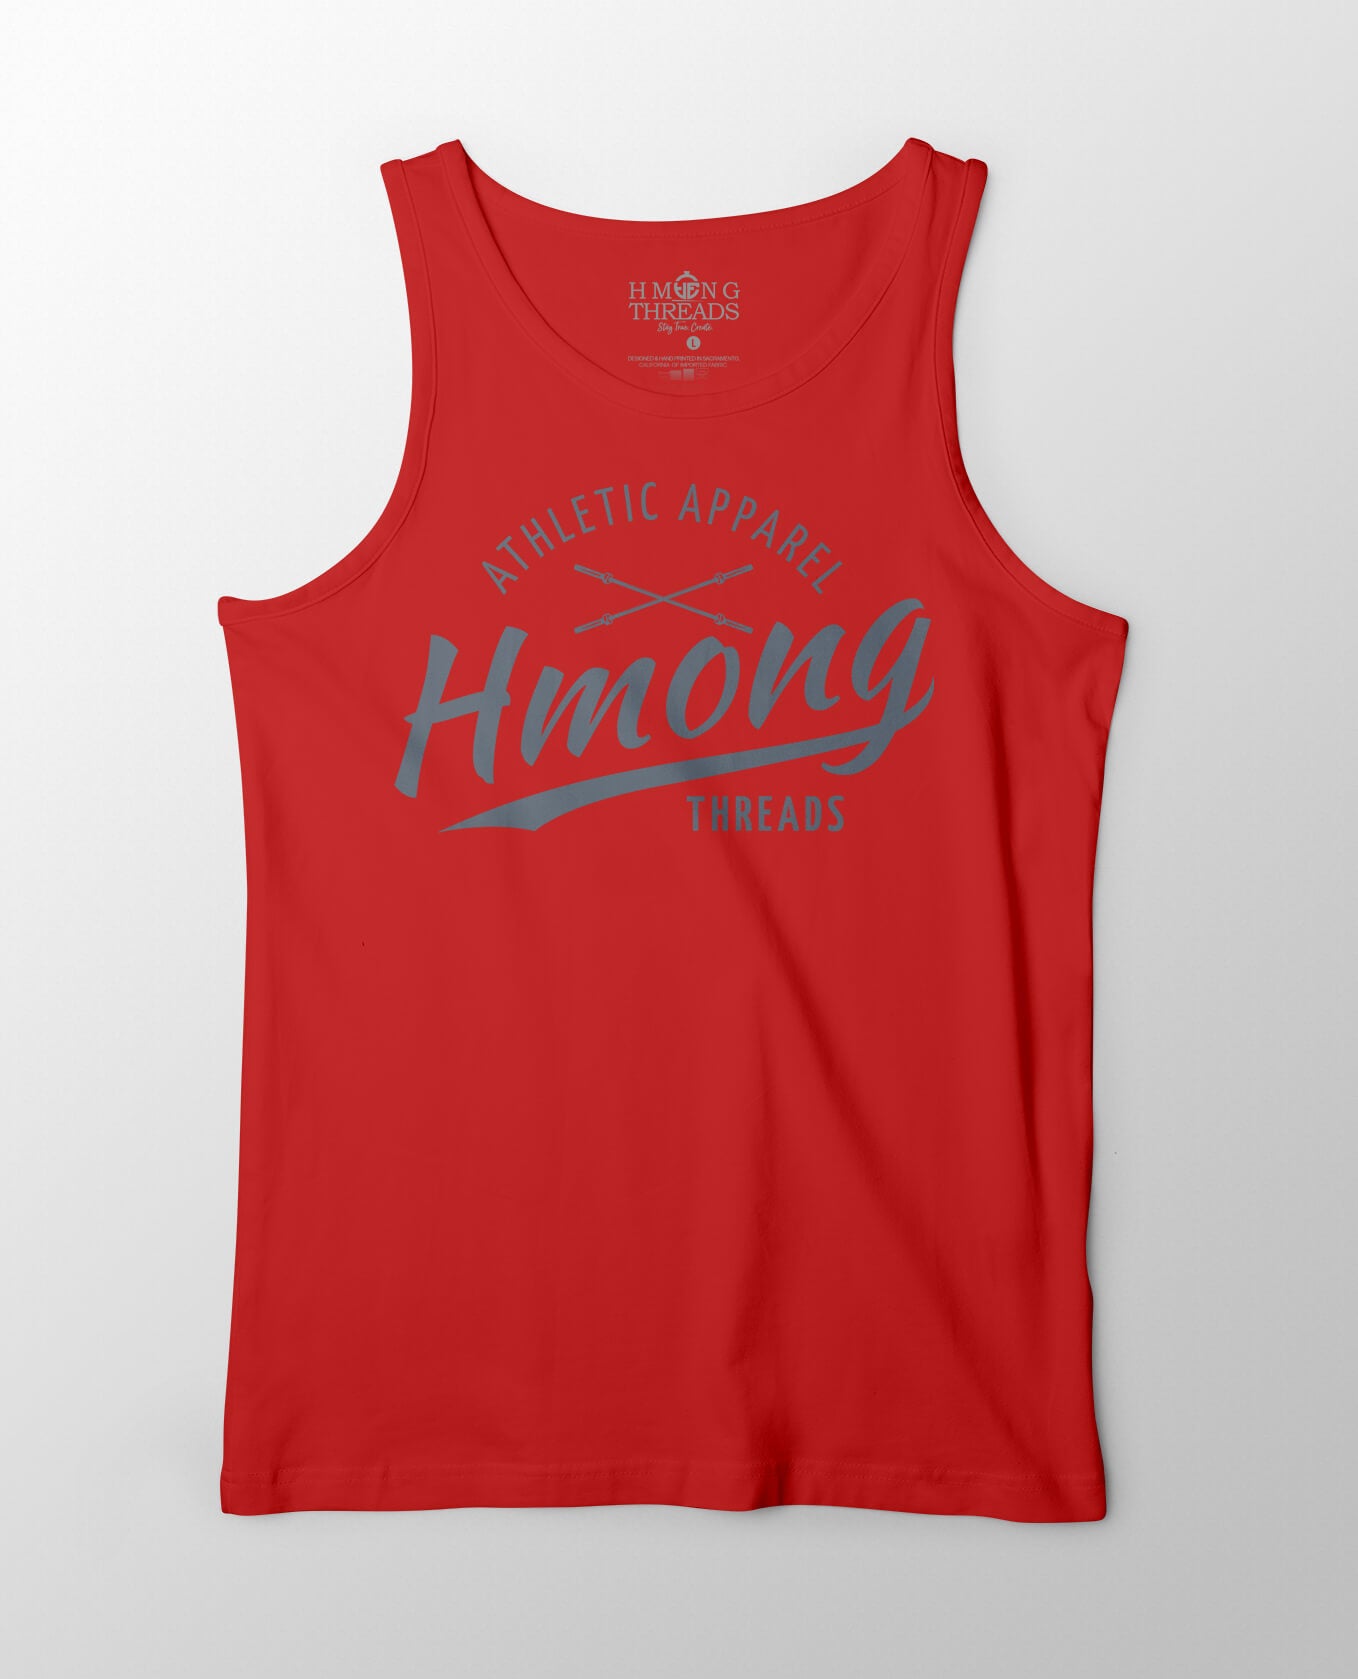 CLASSIC HMONG THREADS ATHLETIC APPAREL RED TANK - HMONG THREADS